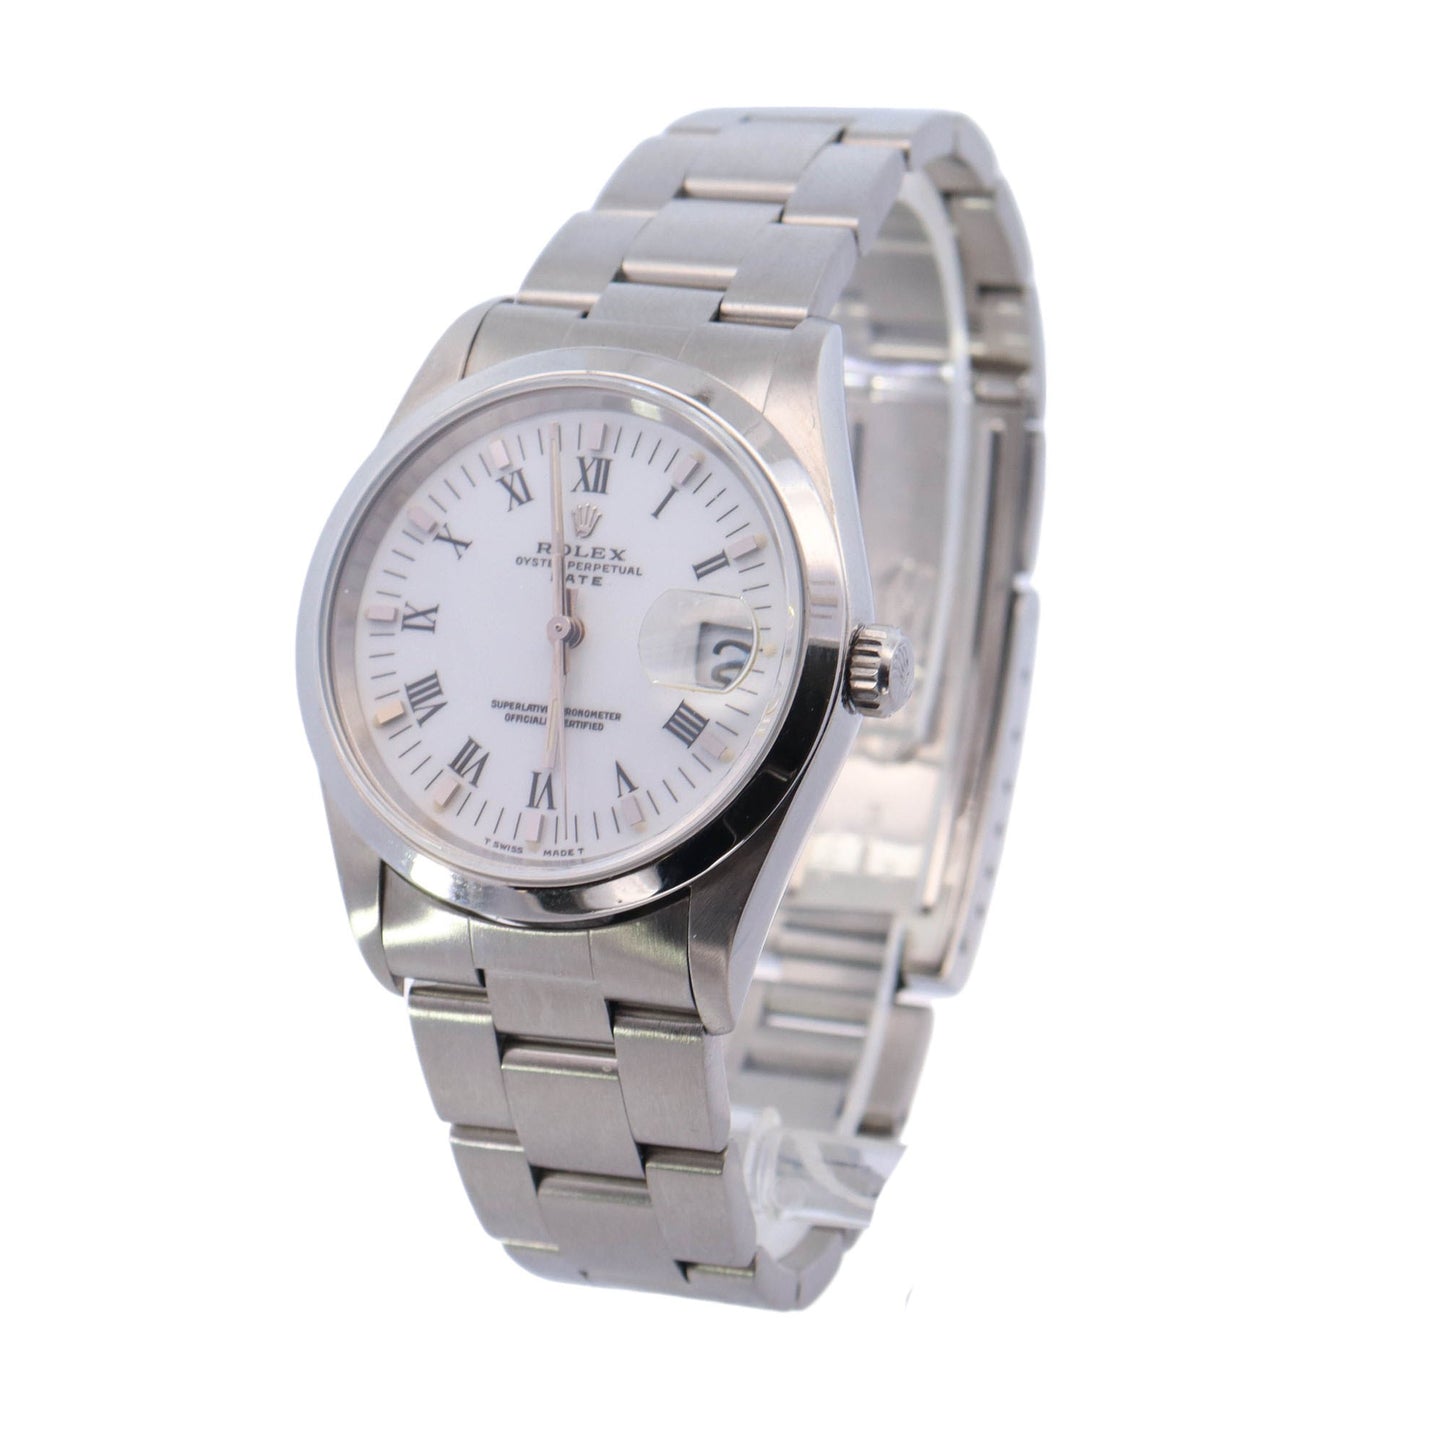 Rolex Oyster Perpetual Date Stainless Steel 34mm White Roman Dial Watch Reference #: 15200